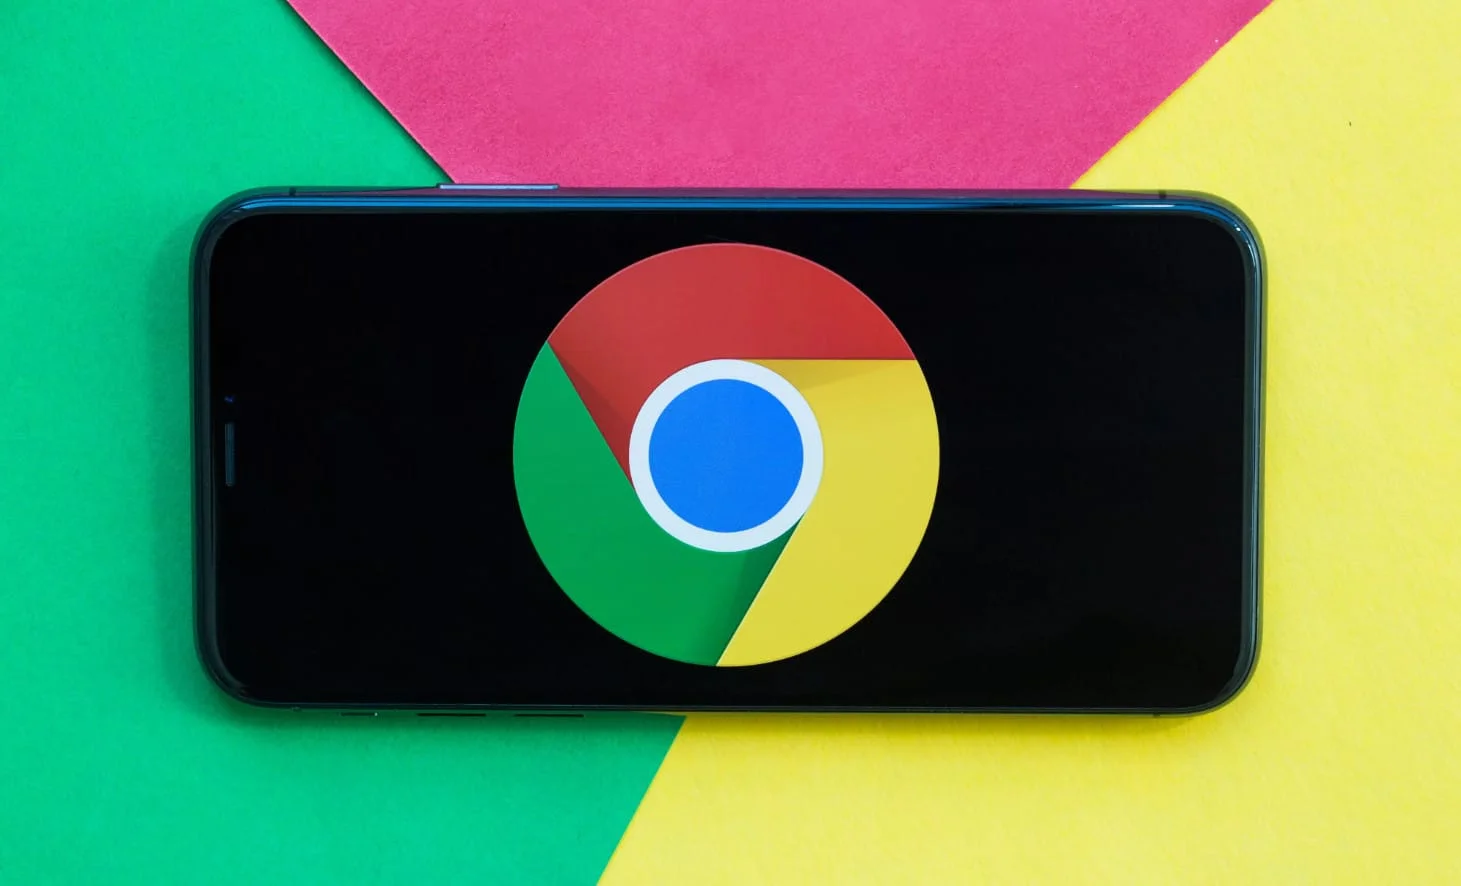 Mobile version of Google Chrome will become better adapted to the user